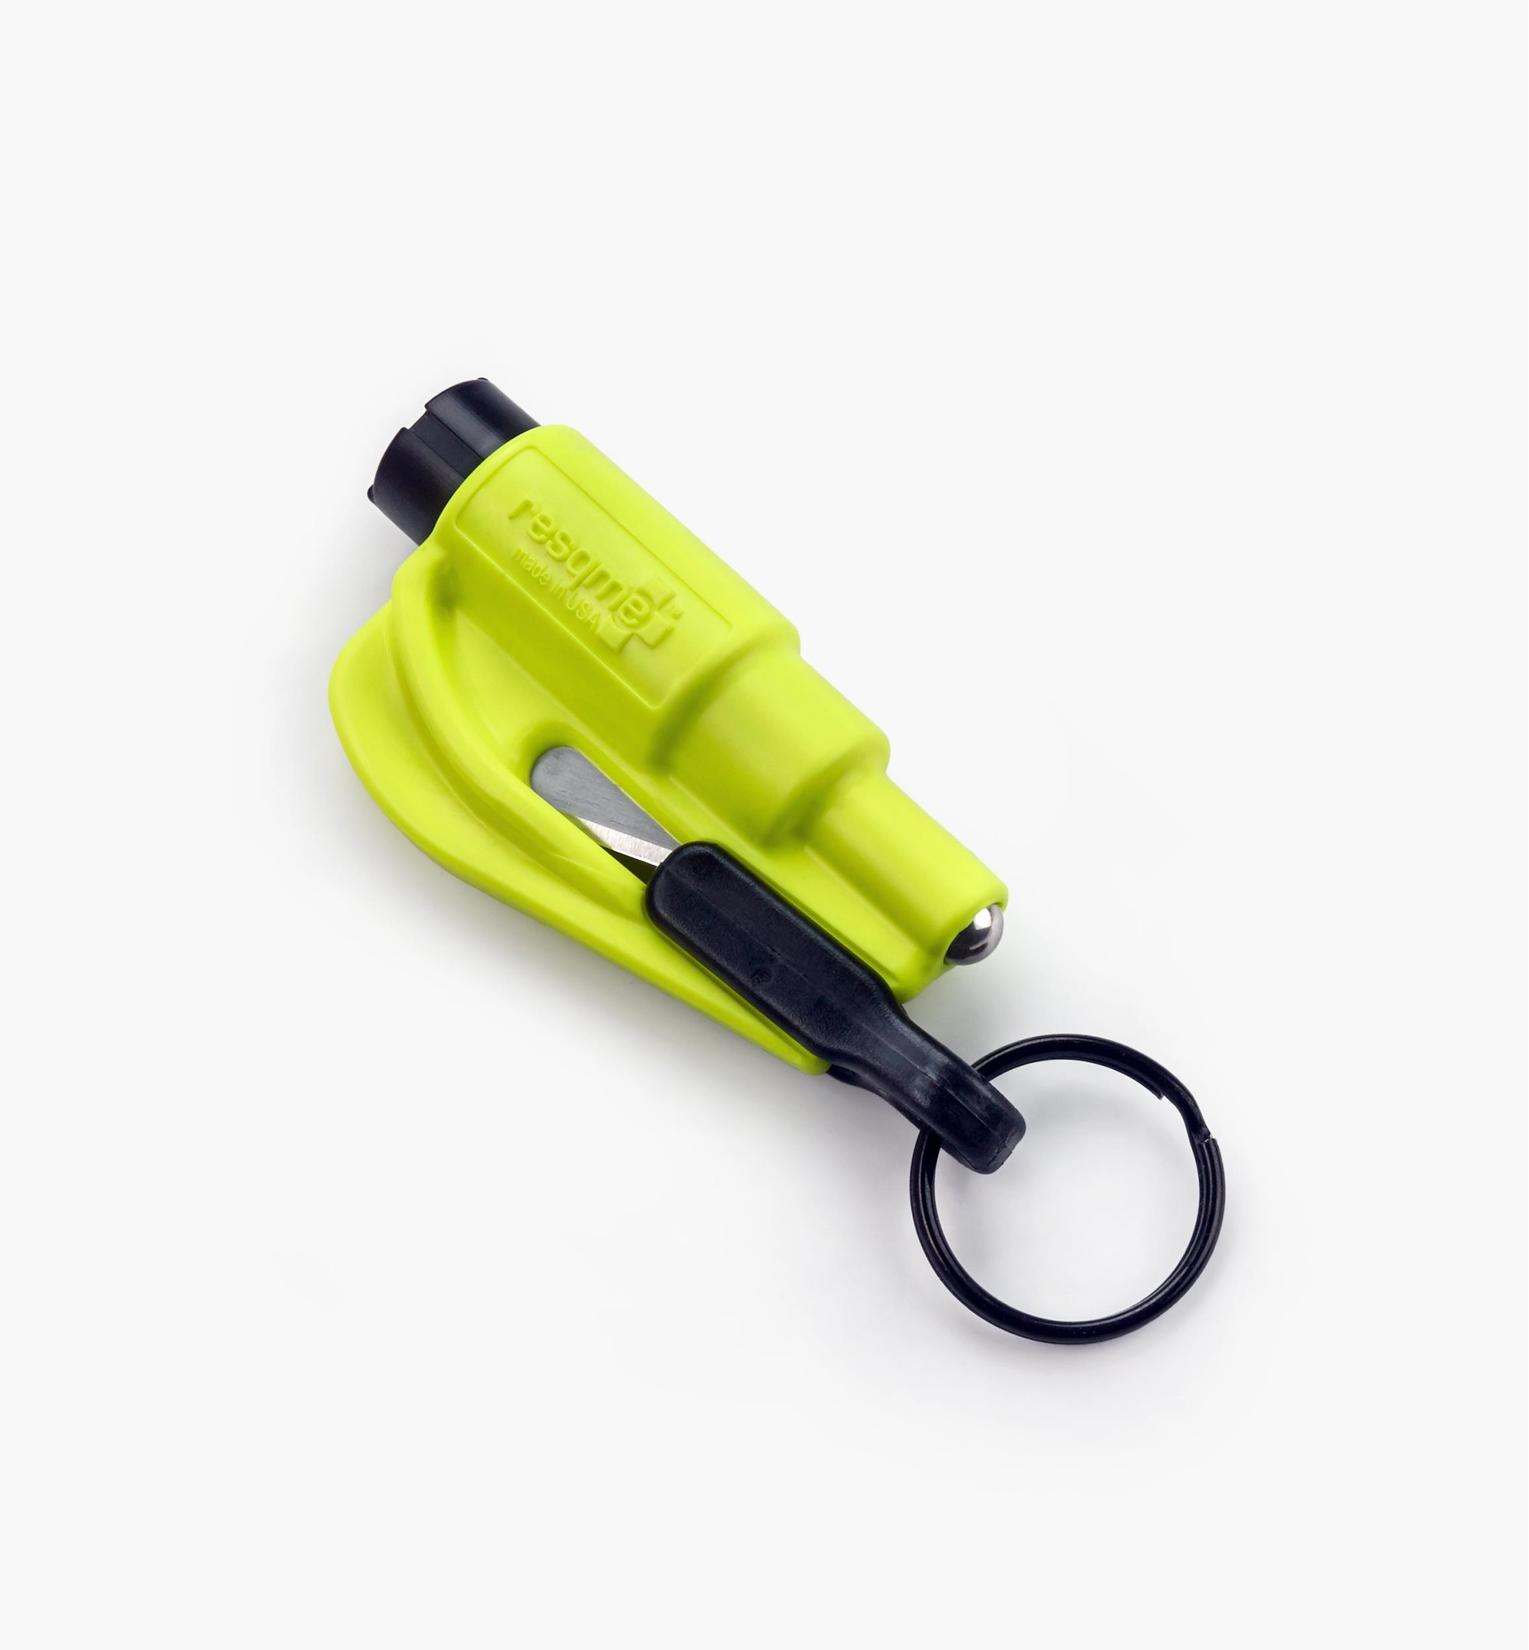 Resqme Car Escape Tool offers at $17.9 in Lee Valley Tools